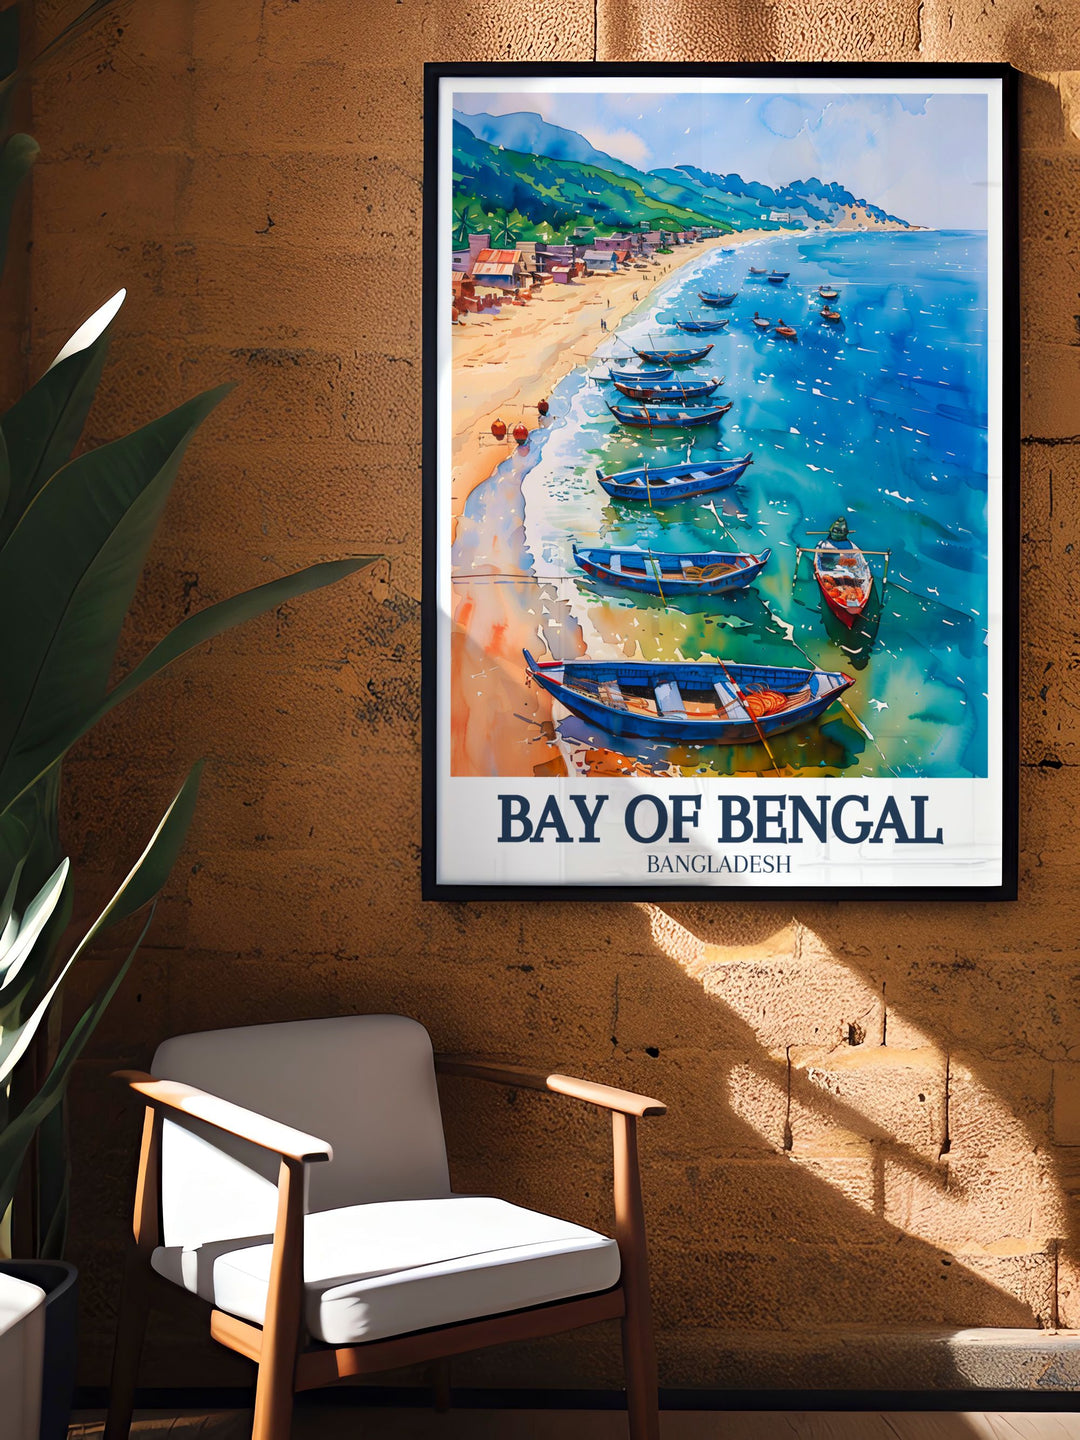 Beautiful Buriganga river, Dhaka, Bay of Bengal travel poster with vibrant colors and detailed artwork bringing the dynamic beauty of the river and Dhaka into your living space.